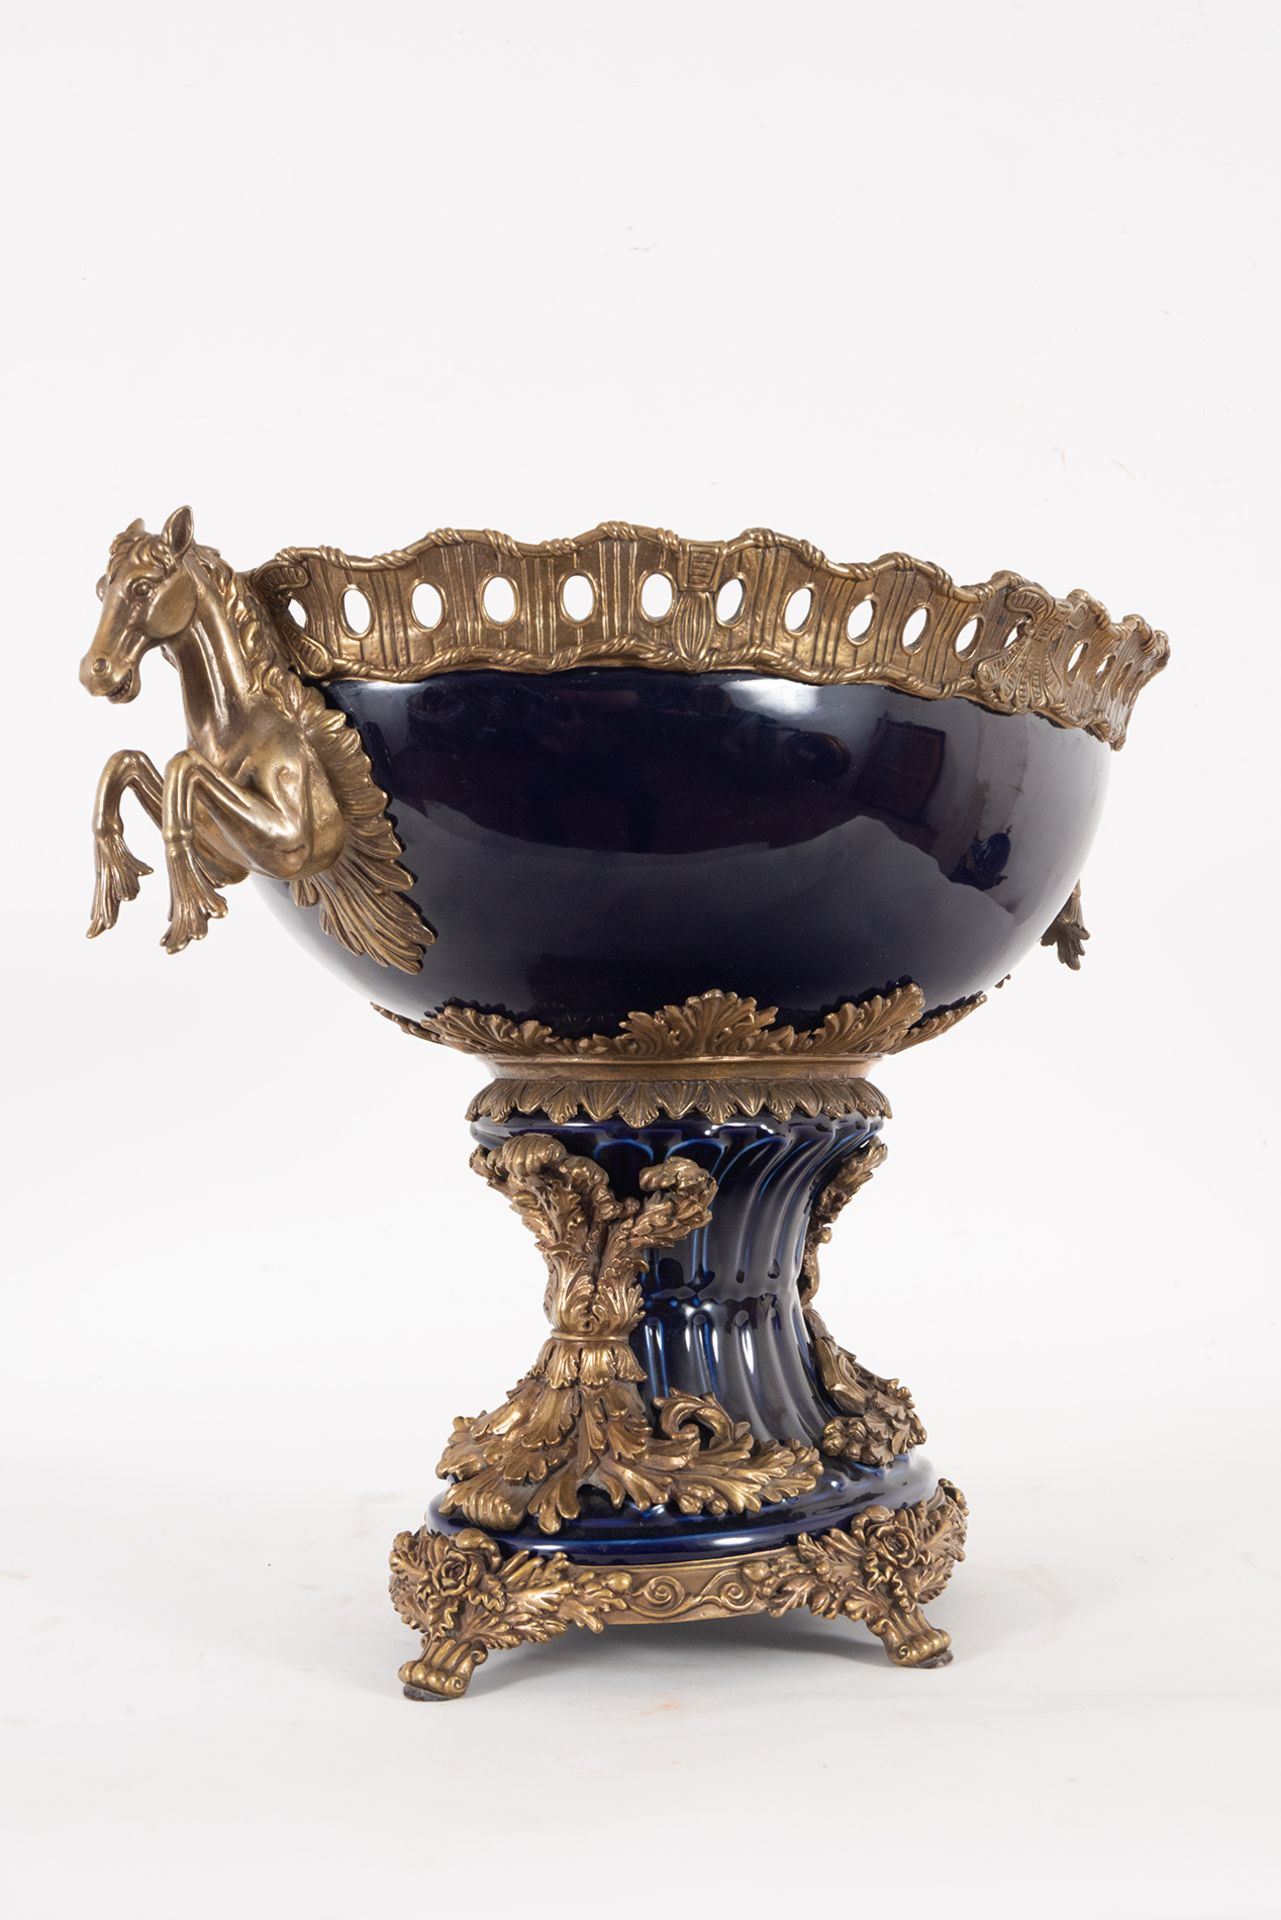 Louis XVI Style Faienza and gilt bronze garniture, 19th-20th century - Image 3 of 9